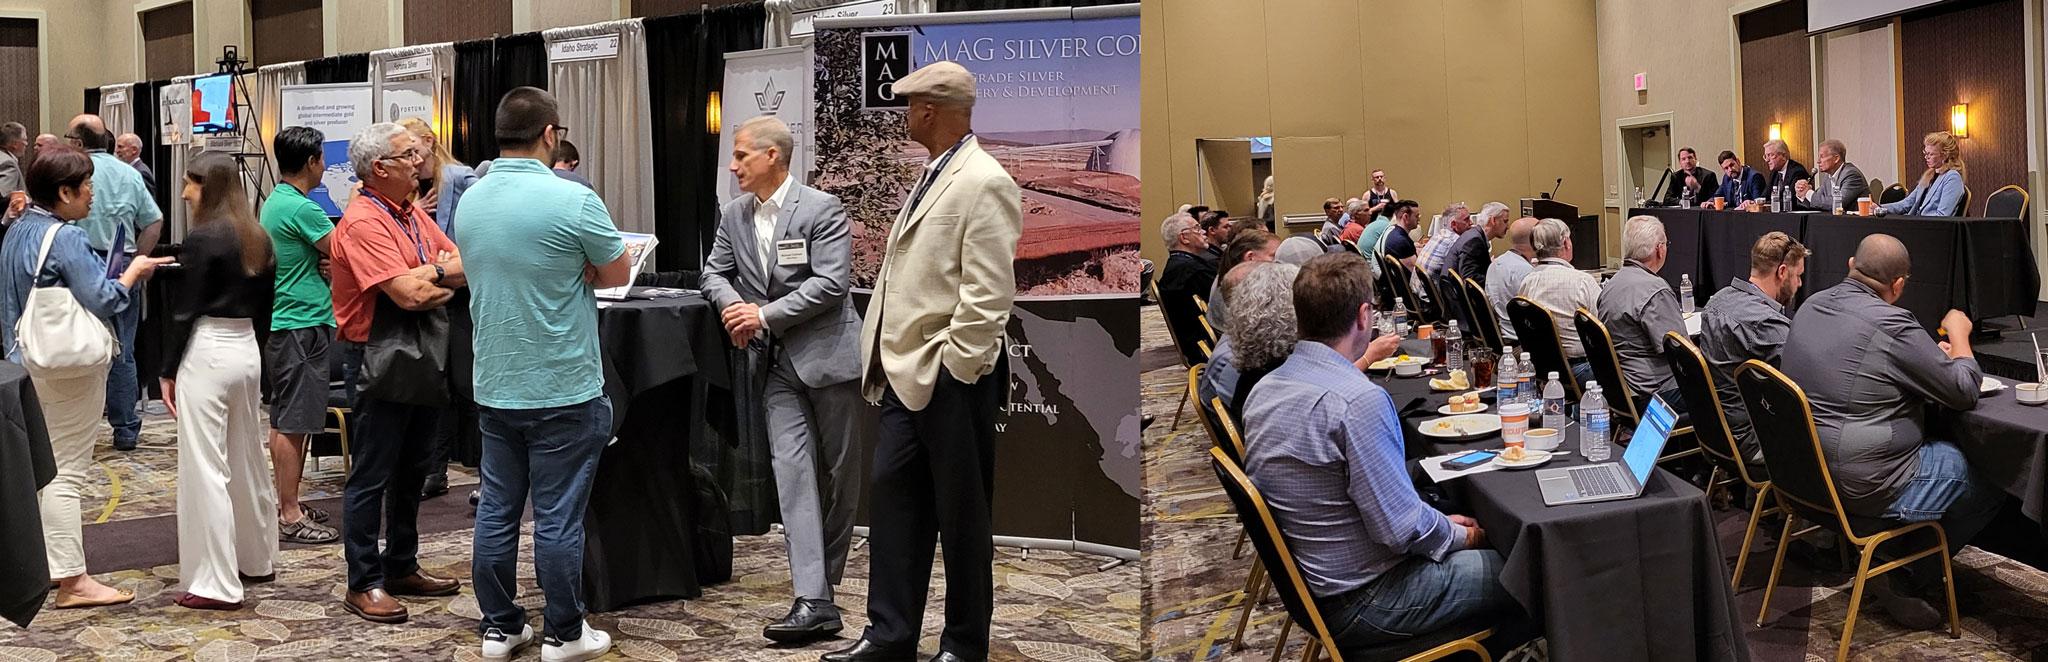 Exhibitor Hall and Panel at the 2022 StockPulse Silver Symposium